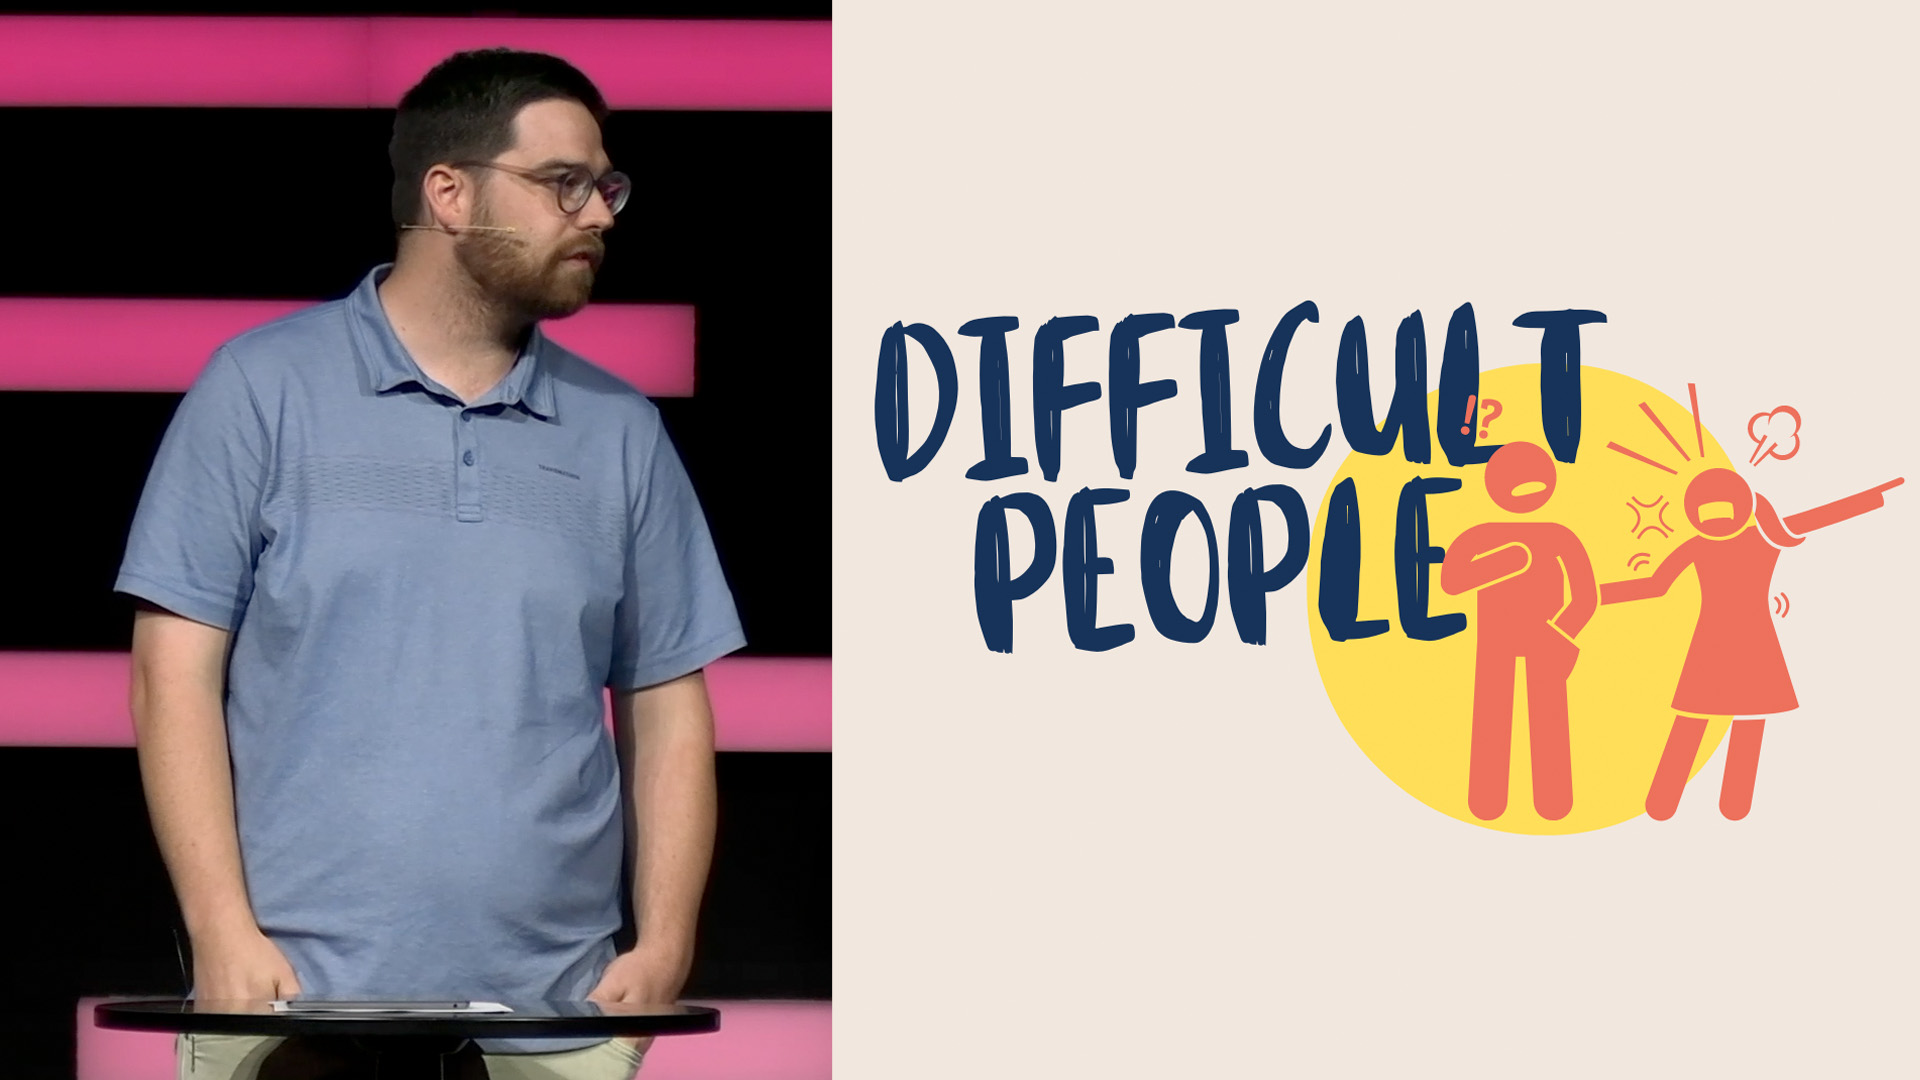 Difficult People - The Hypocrite